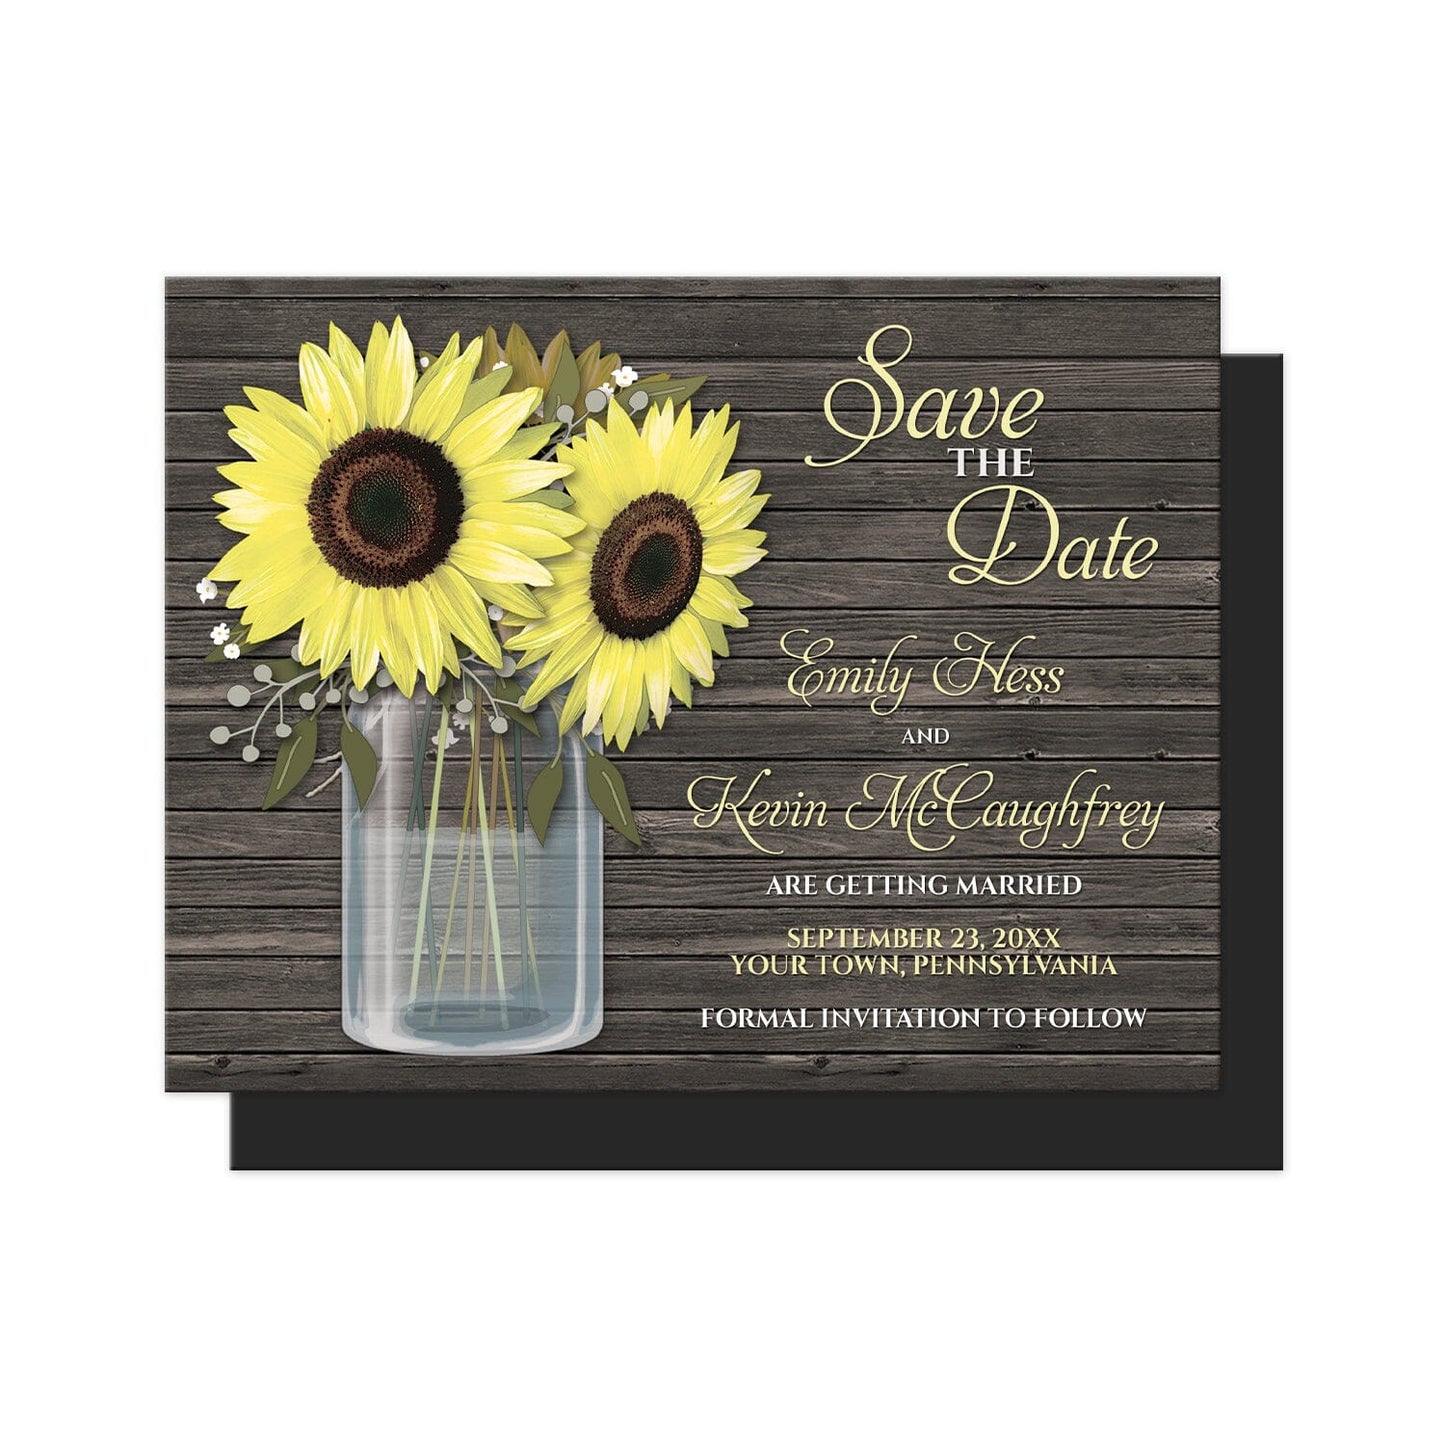 Rustic Sunflower Wood Mason Jar Save the Date Magnets at Artistically Invited. Southern country-inspired rustic sunflower wood mason jar save the date magnets with big yellow sunflowers, small accents of baby's breath, and green leaves in a glass mason jar illustration. Your personalized wedding date details are custom printed in yellow and white to the right of the sunflowers and mason jar design over a dark brown wood background.